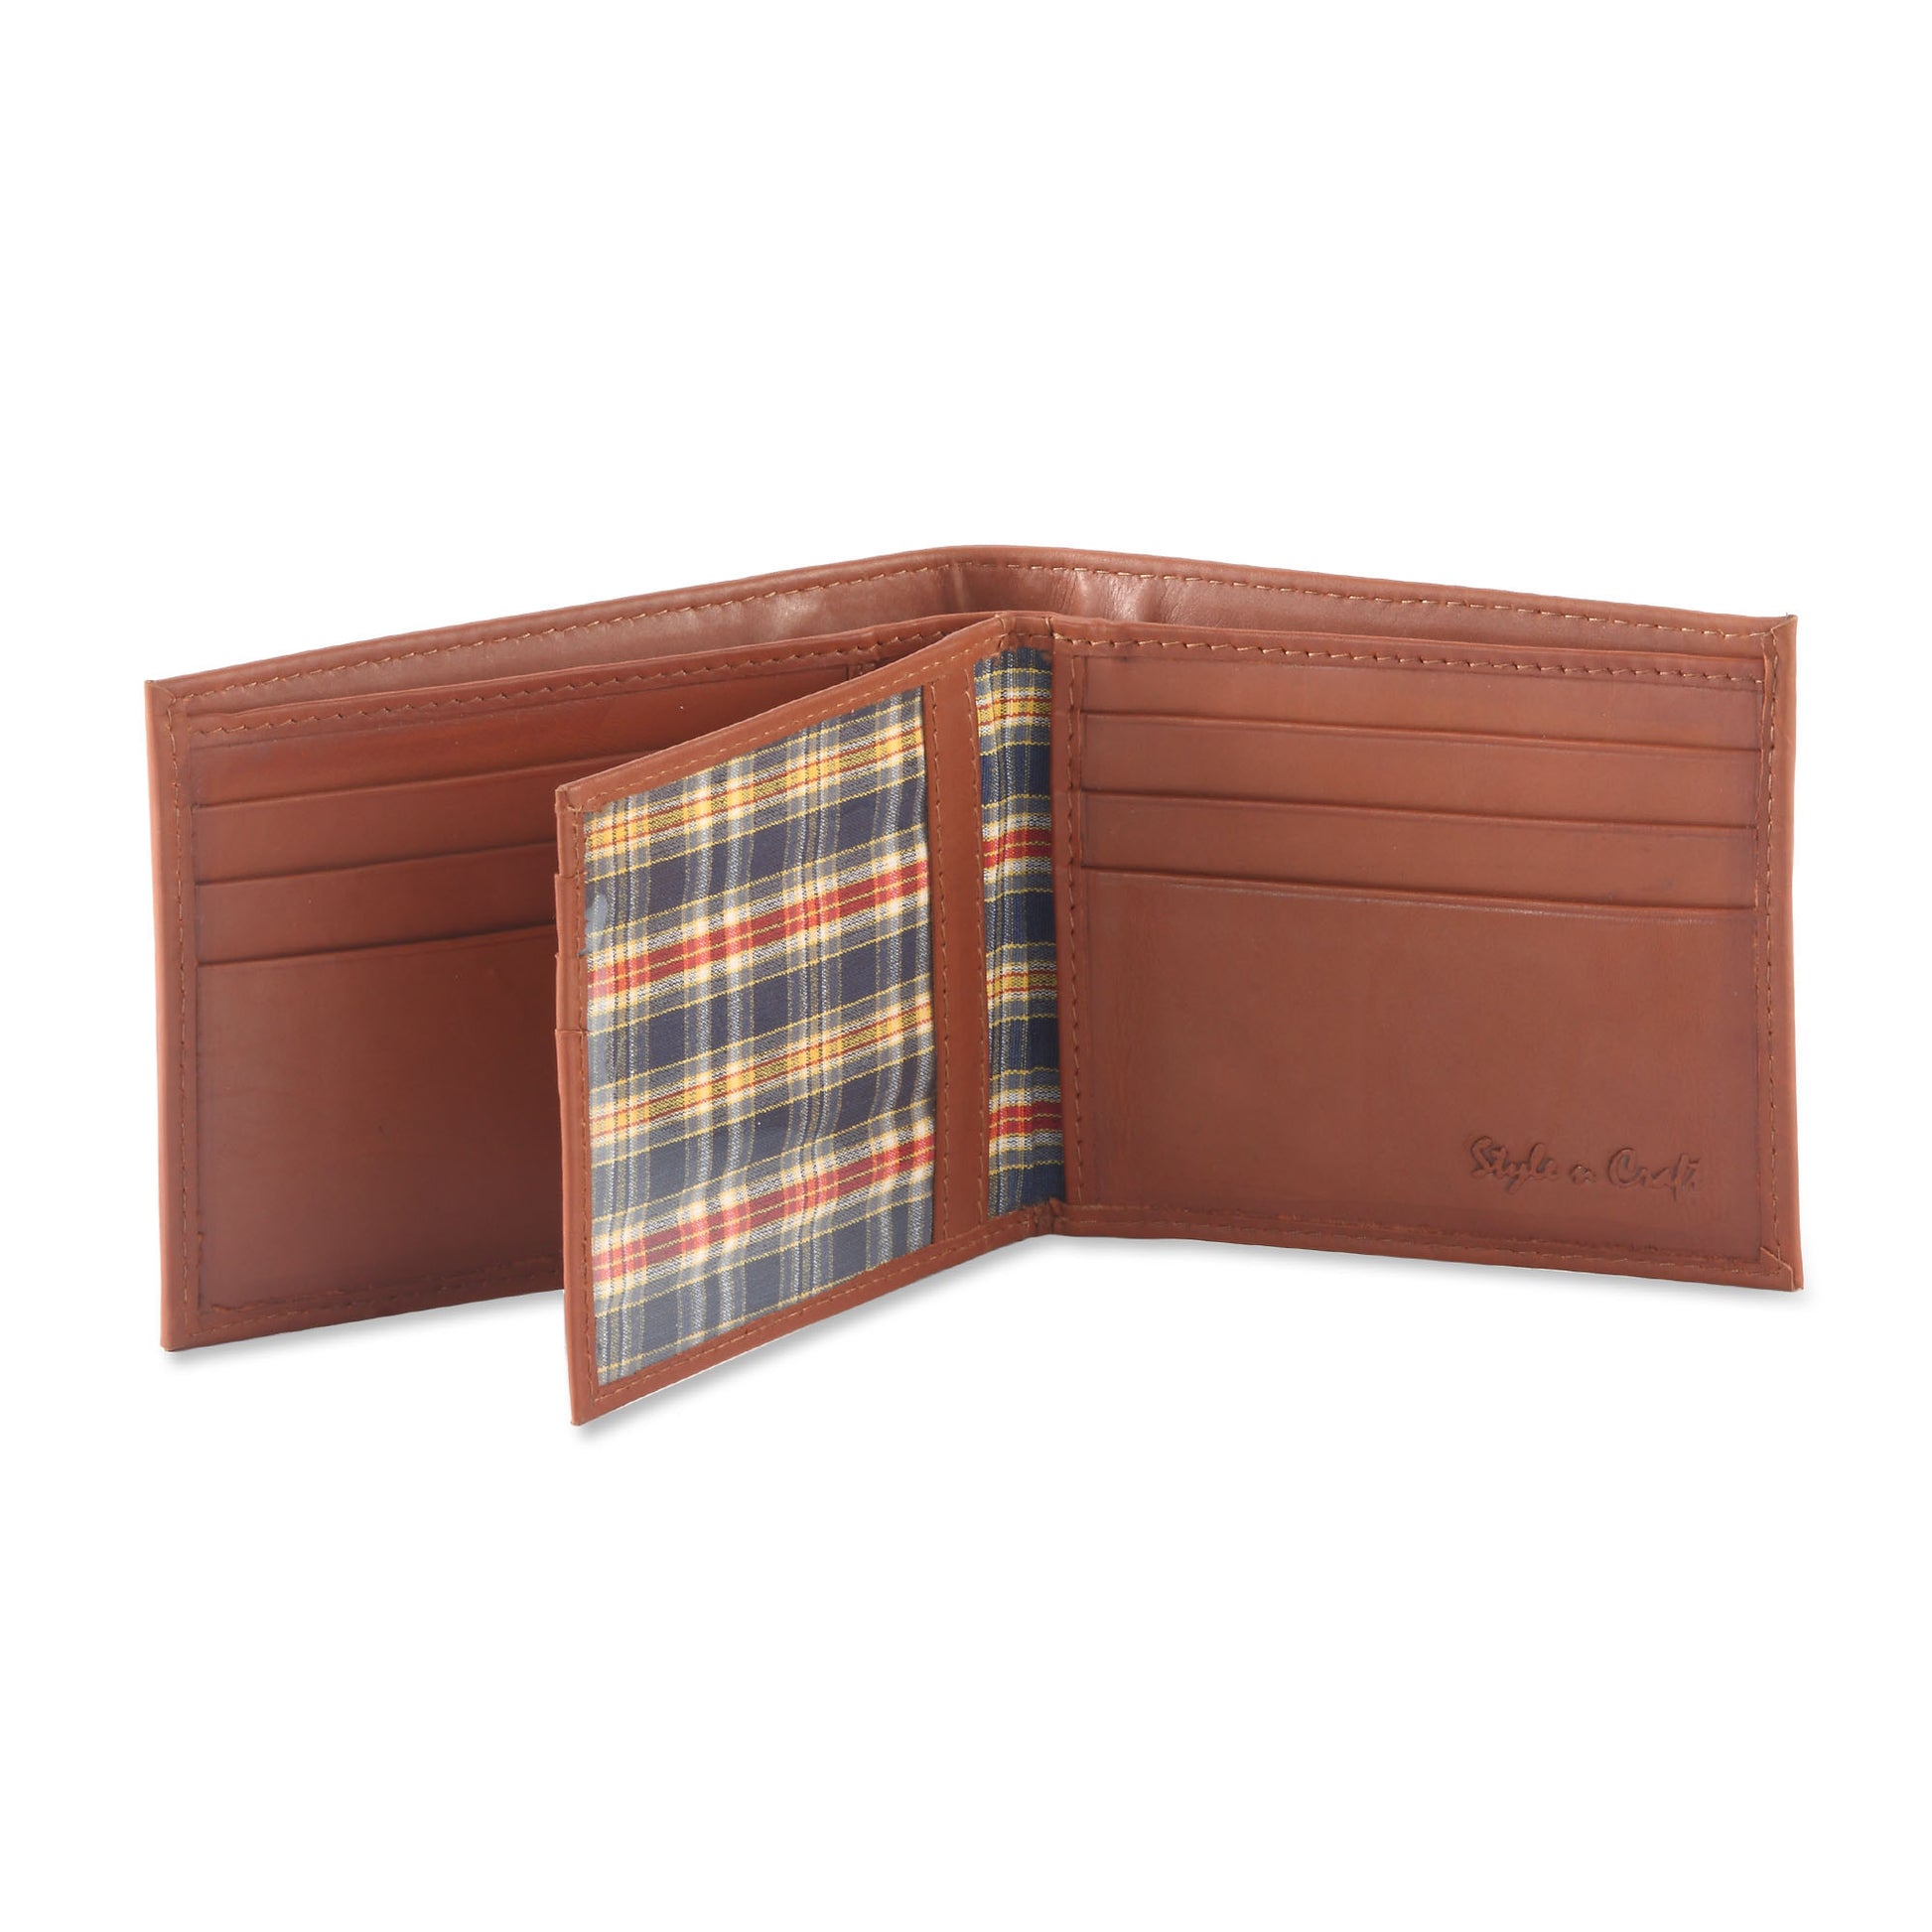 Style n Craft 200161 bifold wallet with center flap in tan color leather - open view 2